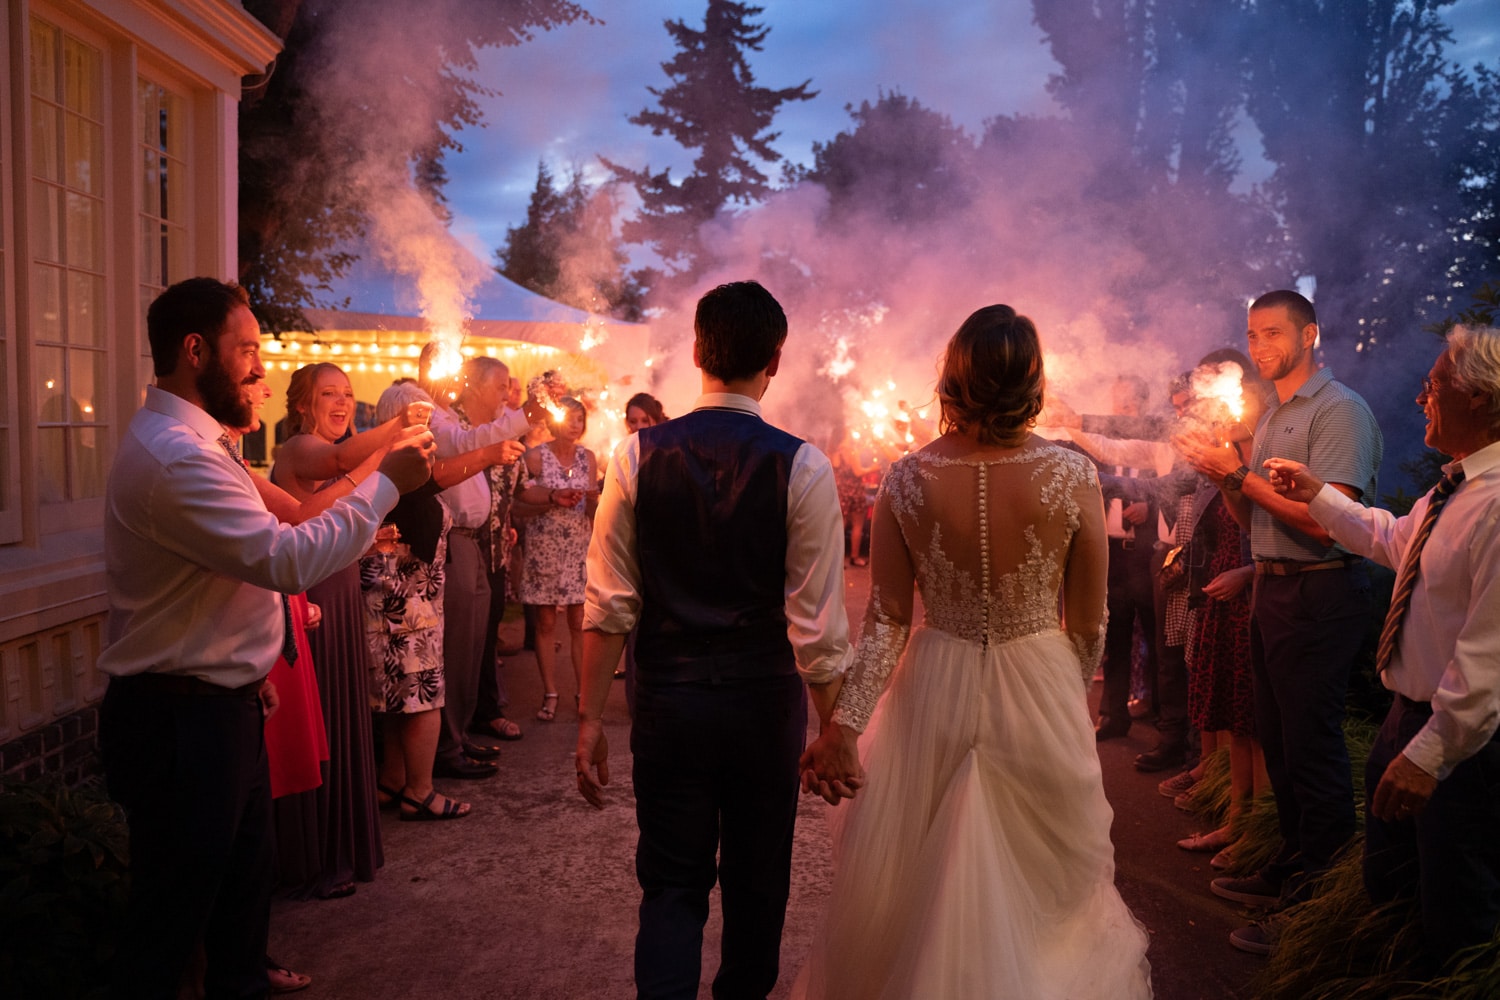 bellingham wedding venue with Eb and Greg at Lairmont manor for an elegant wedding in pnw and Seattle sparkler grand exit